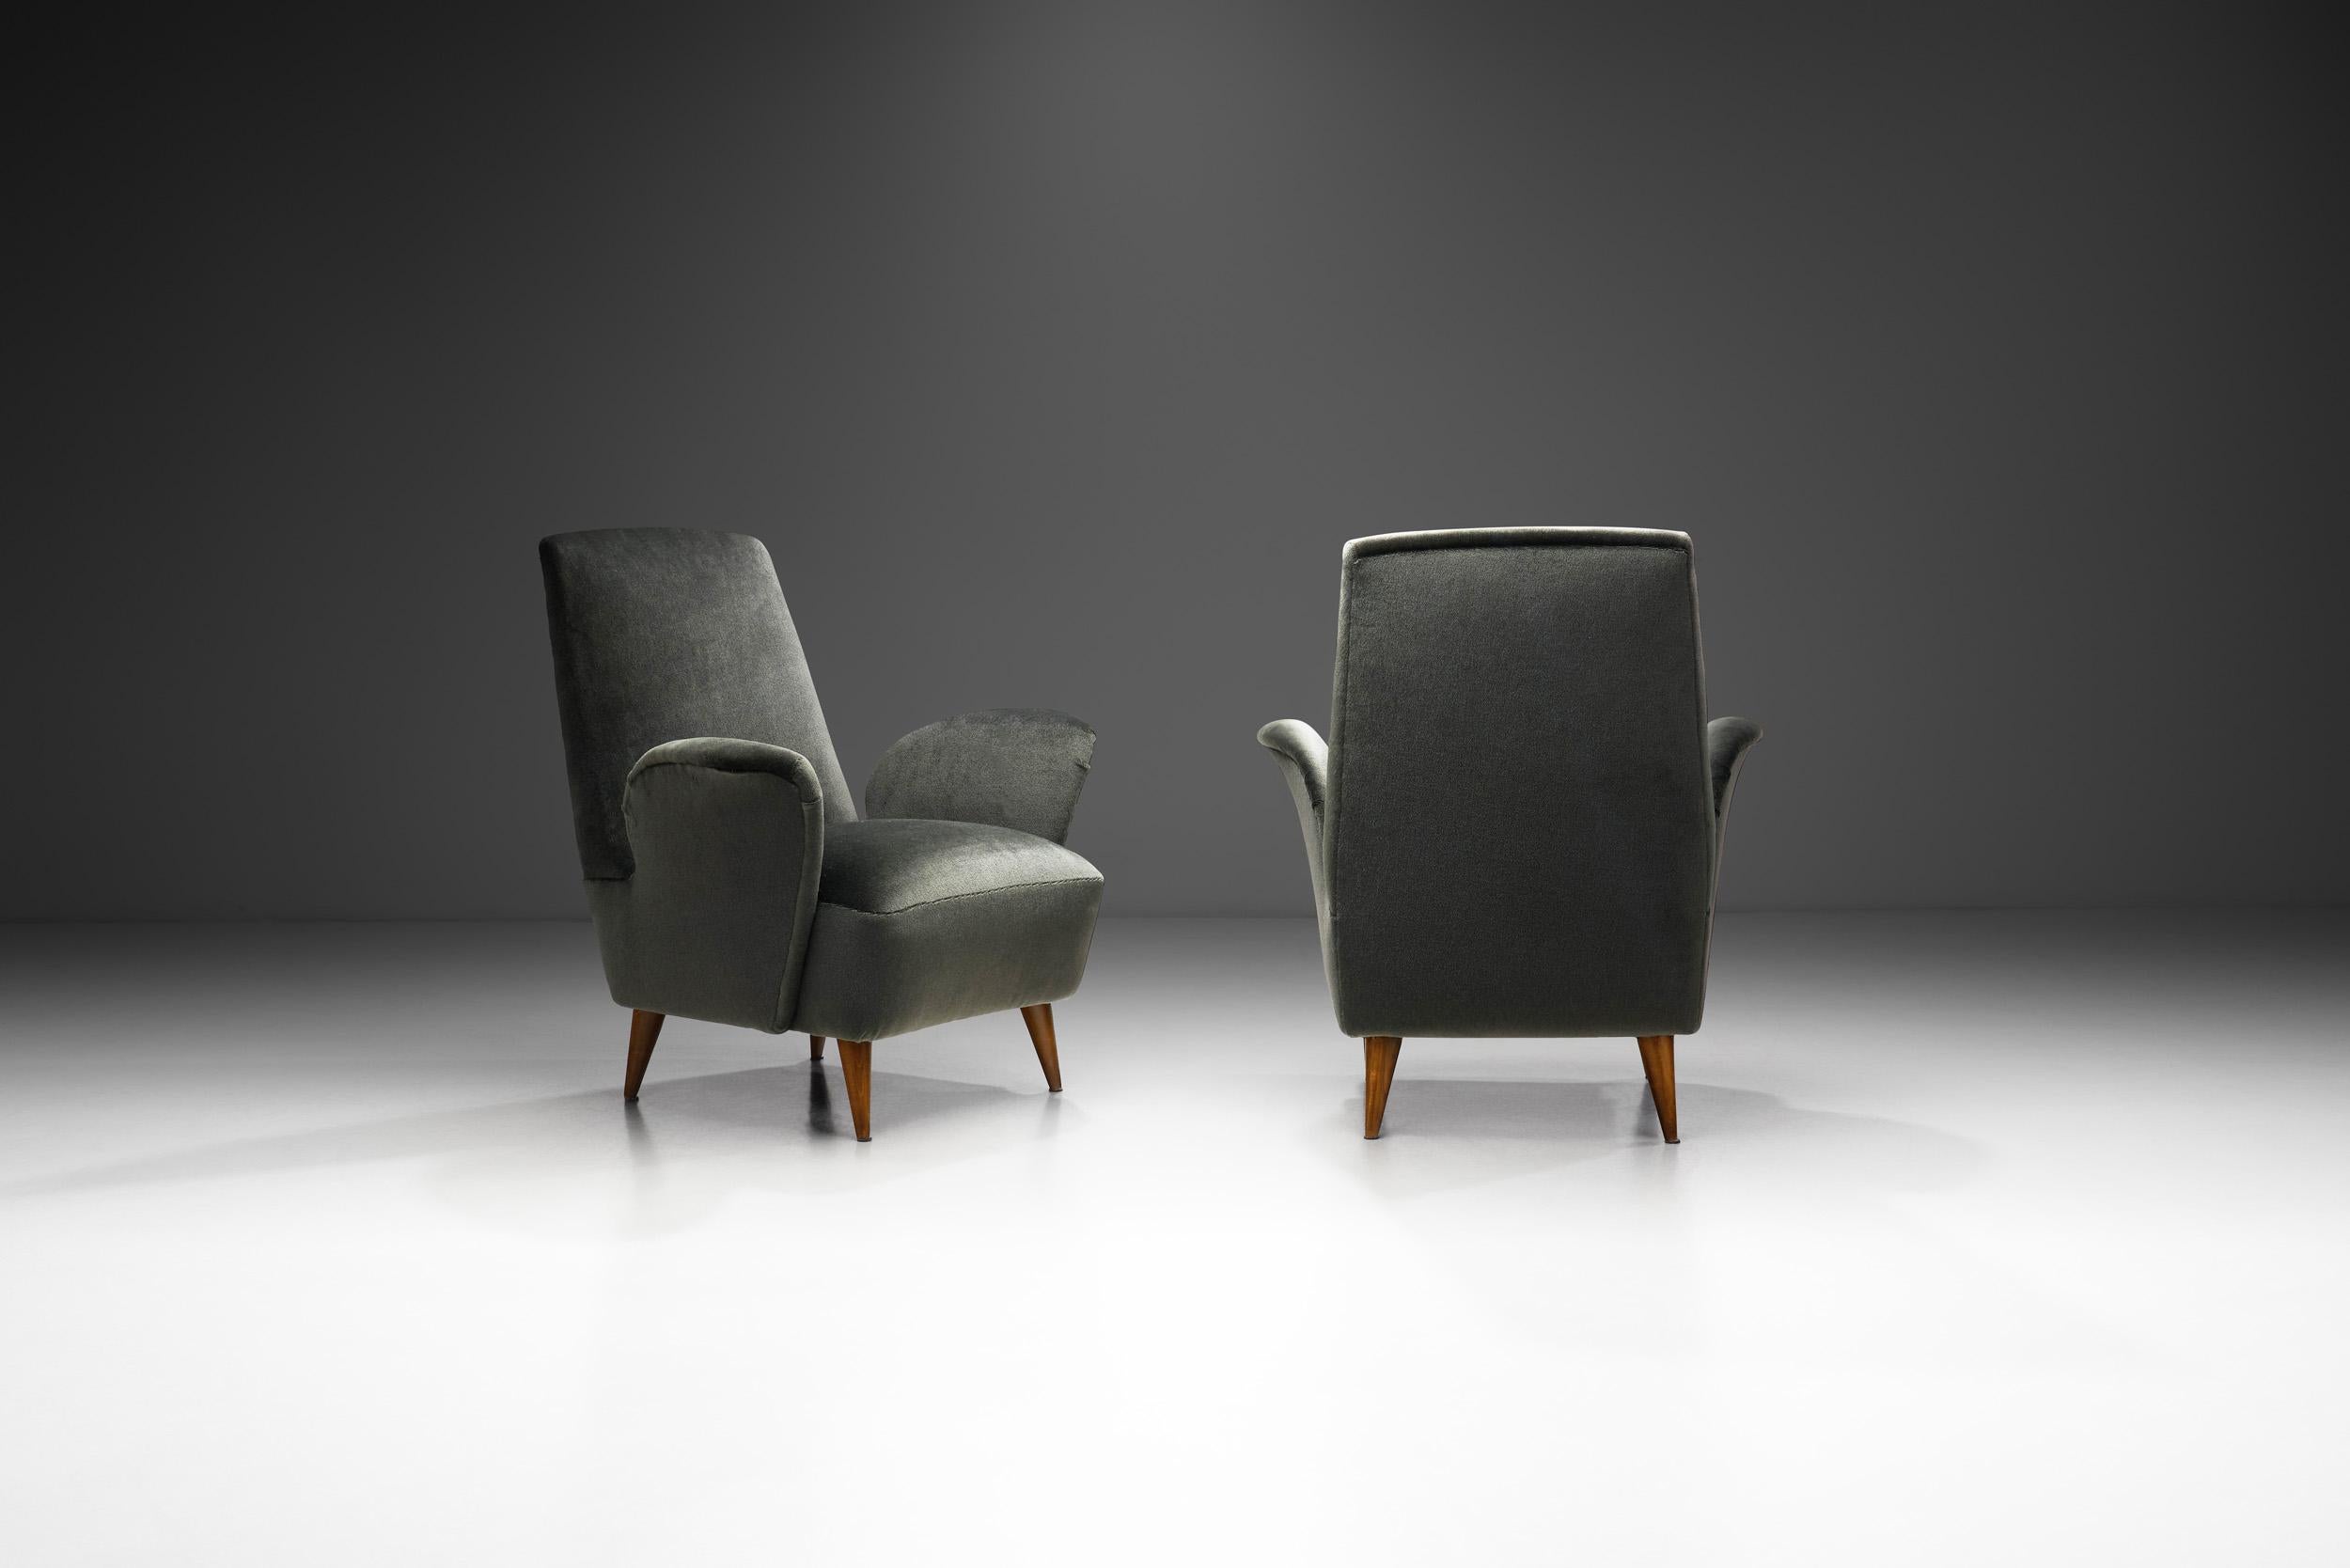 Mid-Century Modern Sculptural Lounge Chairs by Nino Zoncada for Frimar, Italy 1950s For Sale